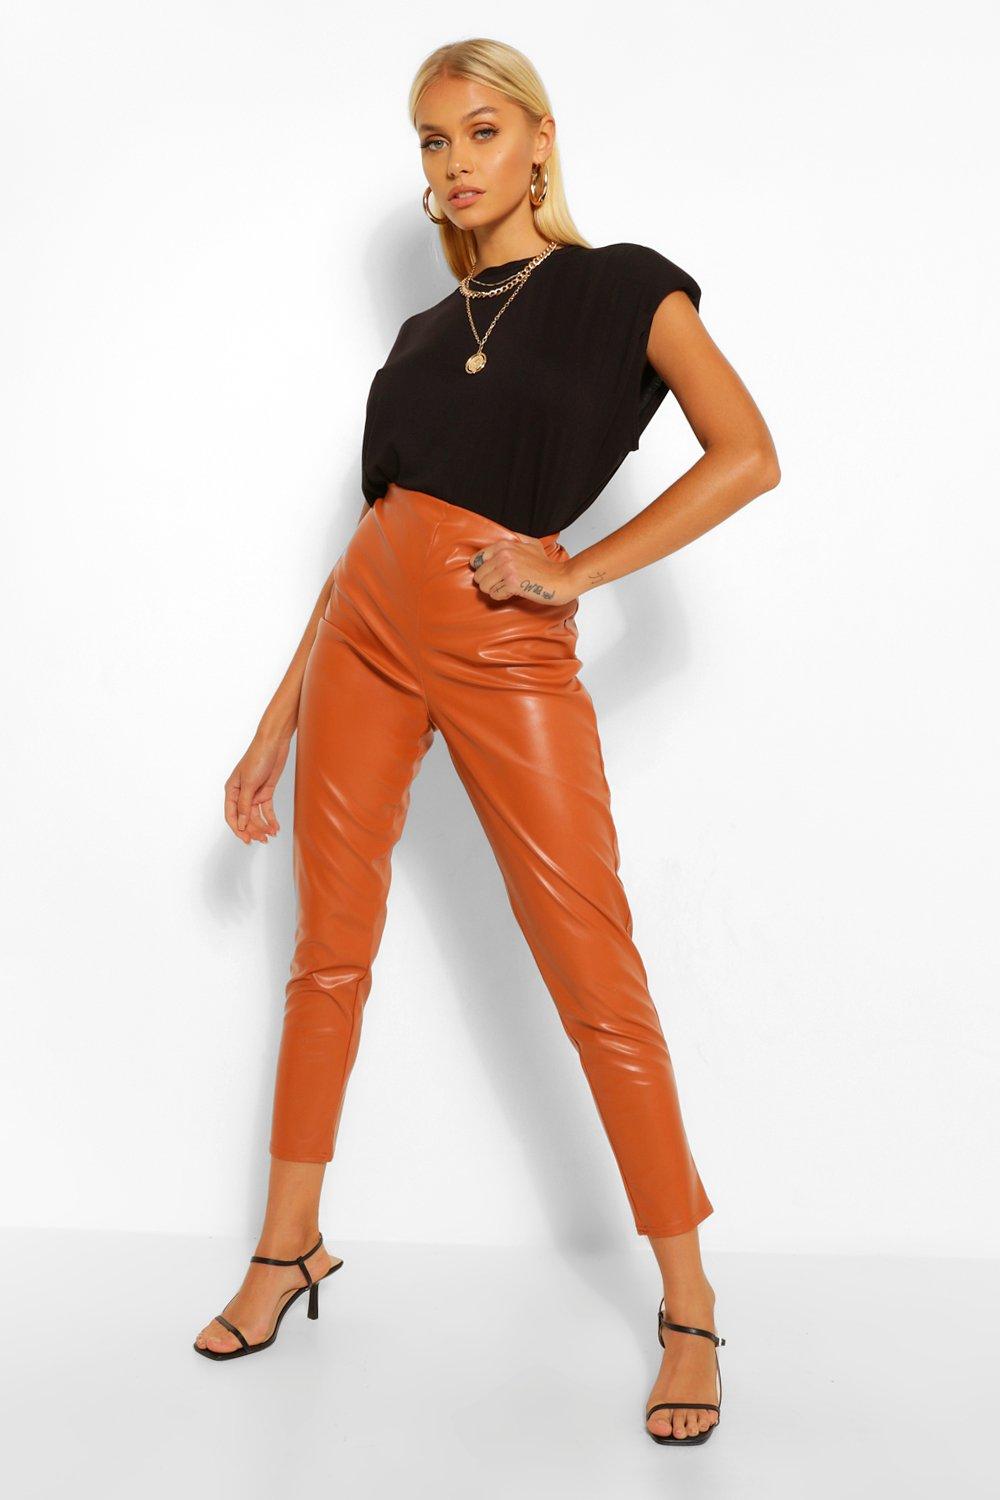 super high waisted leather trousers